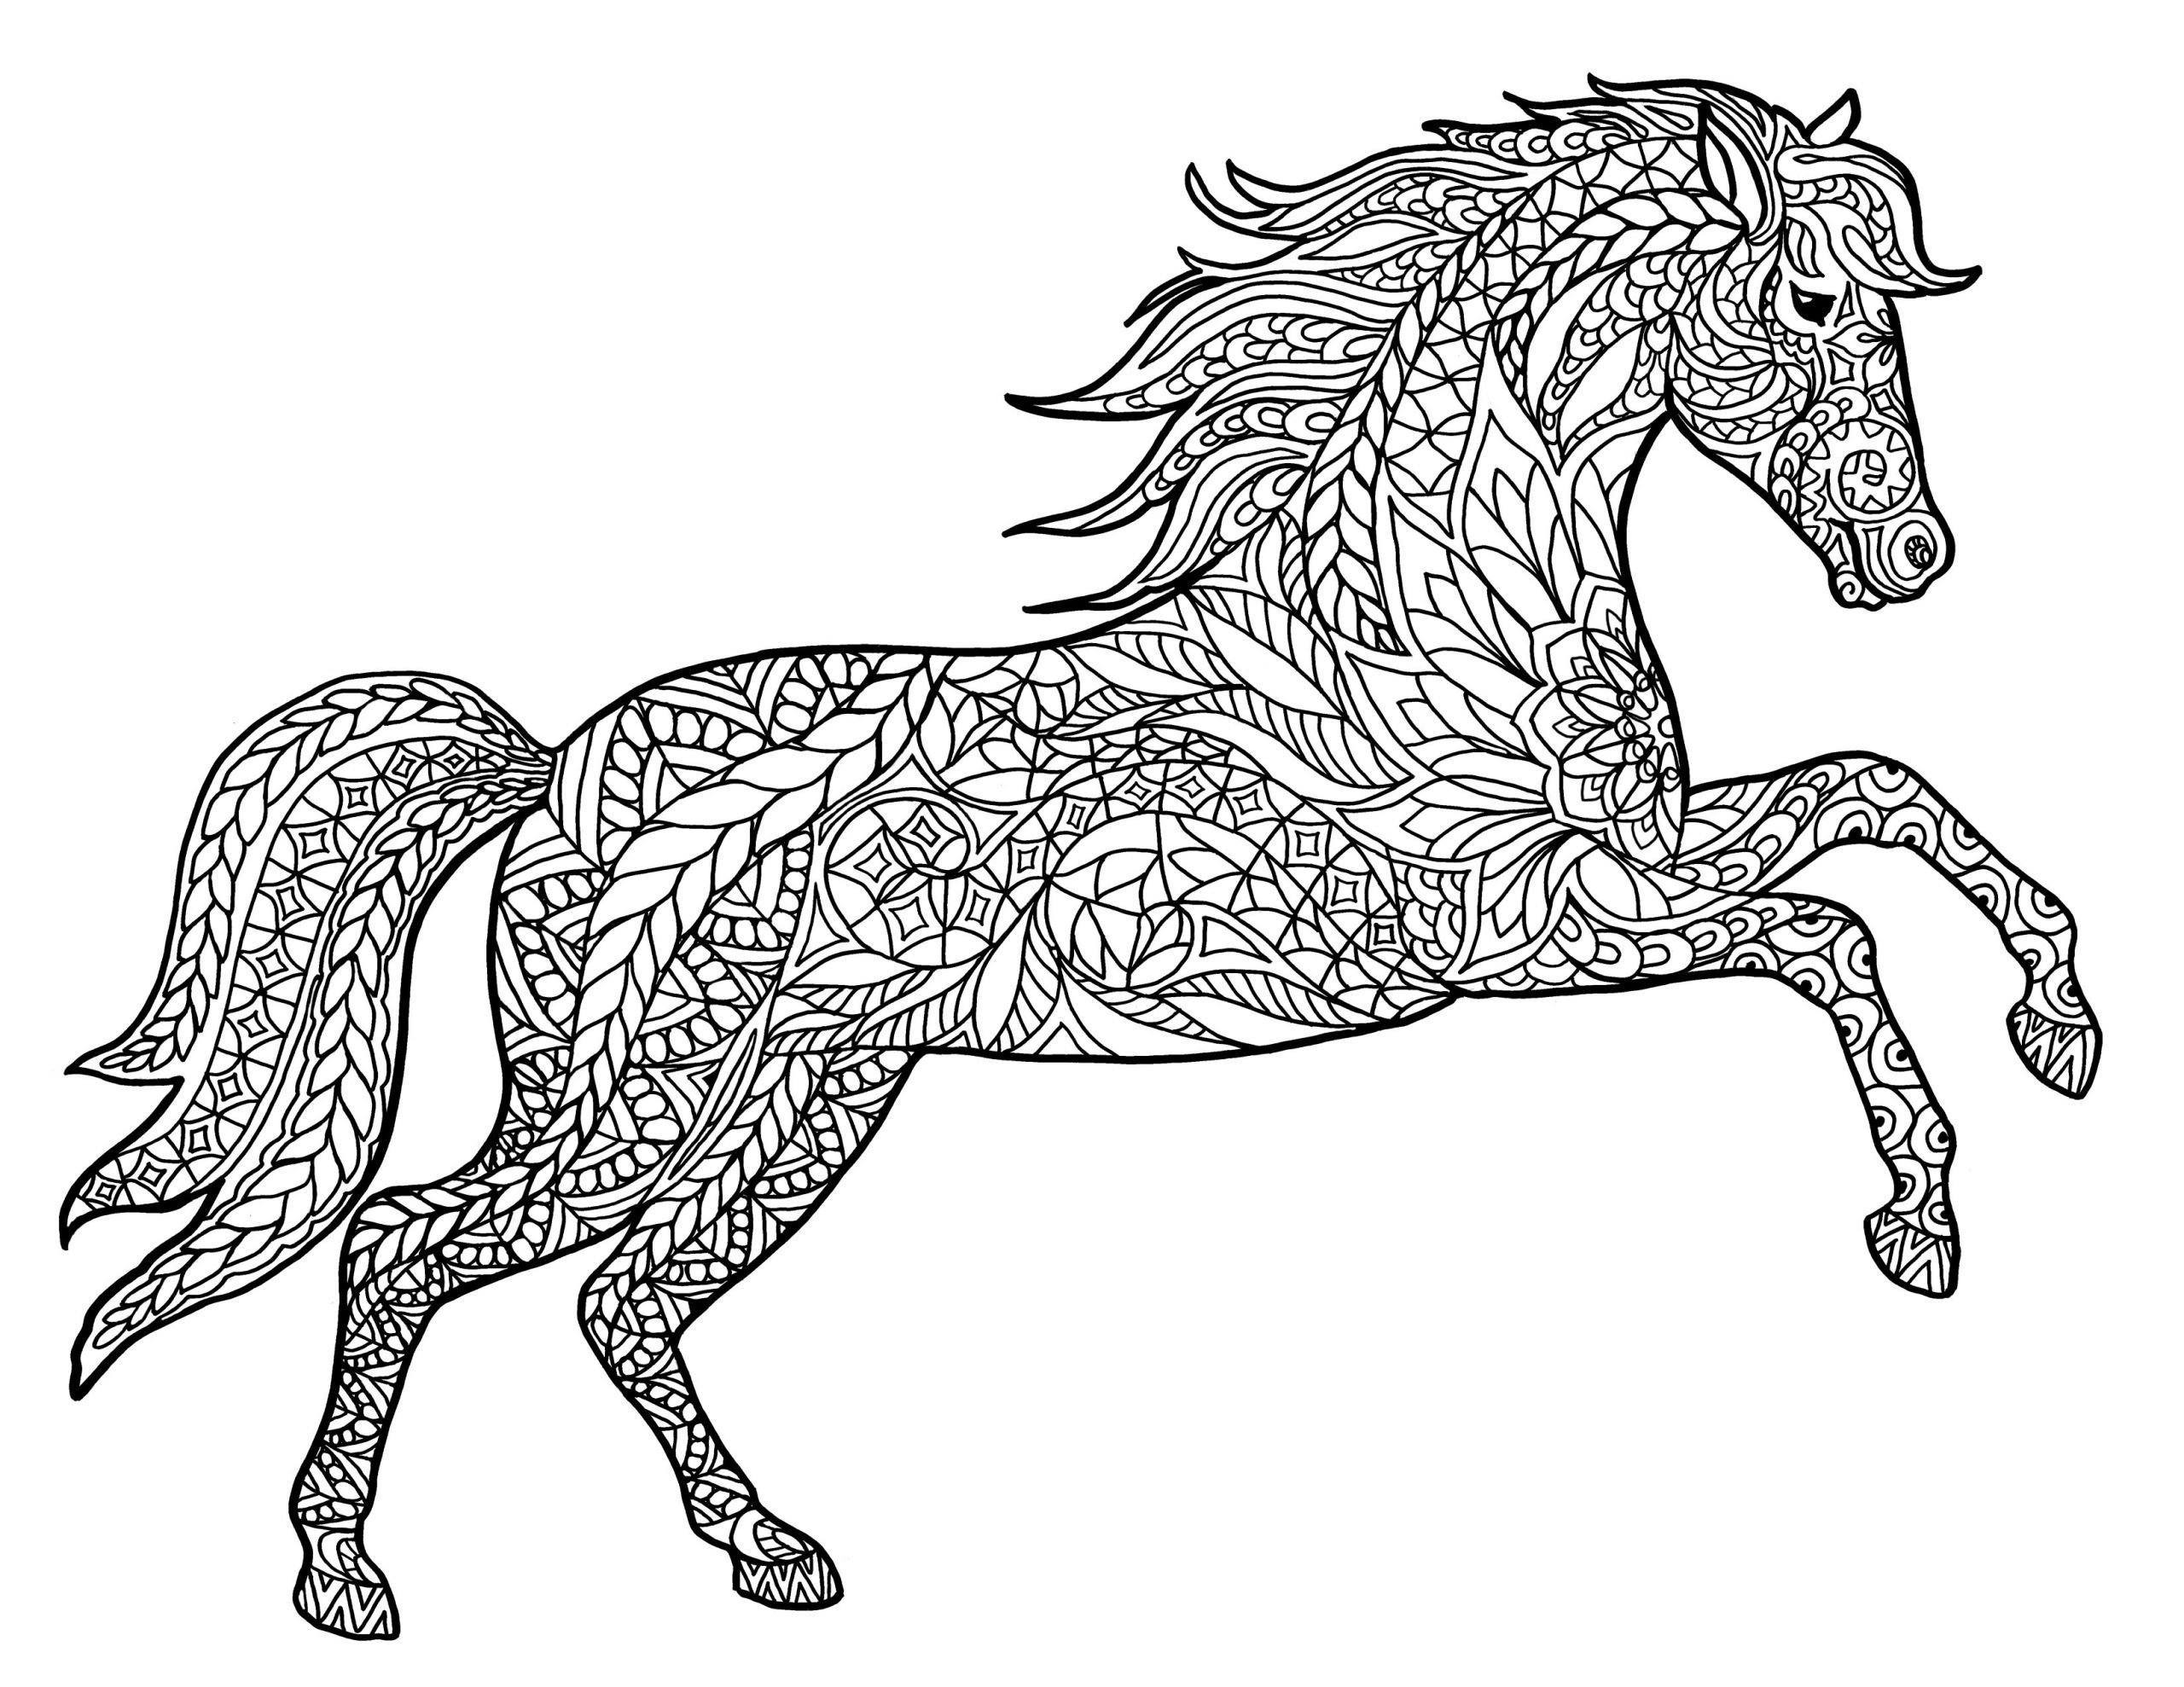 Adult Coloring Pages Horses
 Animal Coloring Pages for Adults Best Coloring Pages For